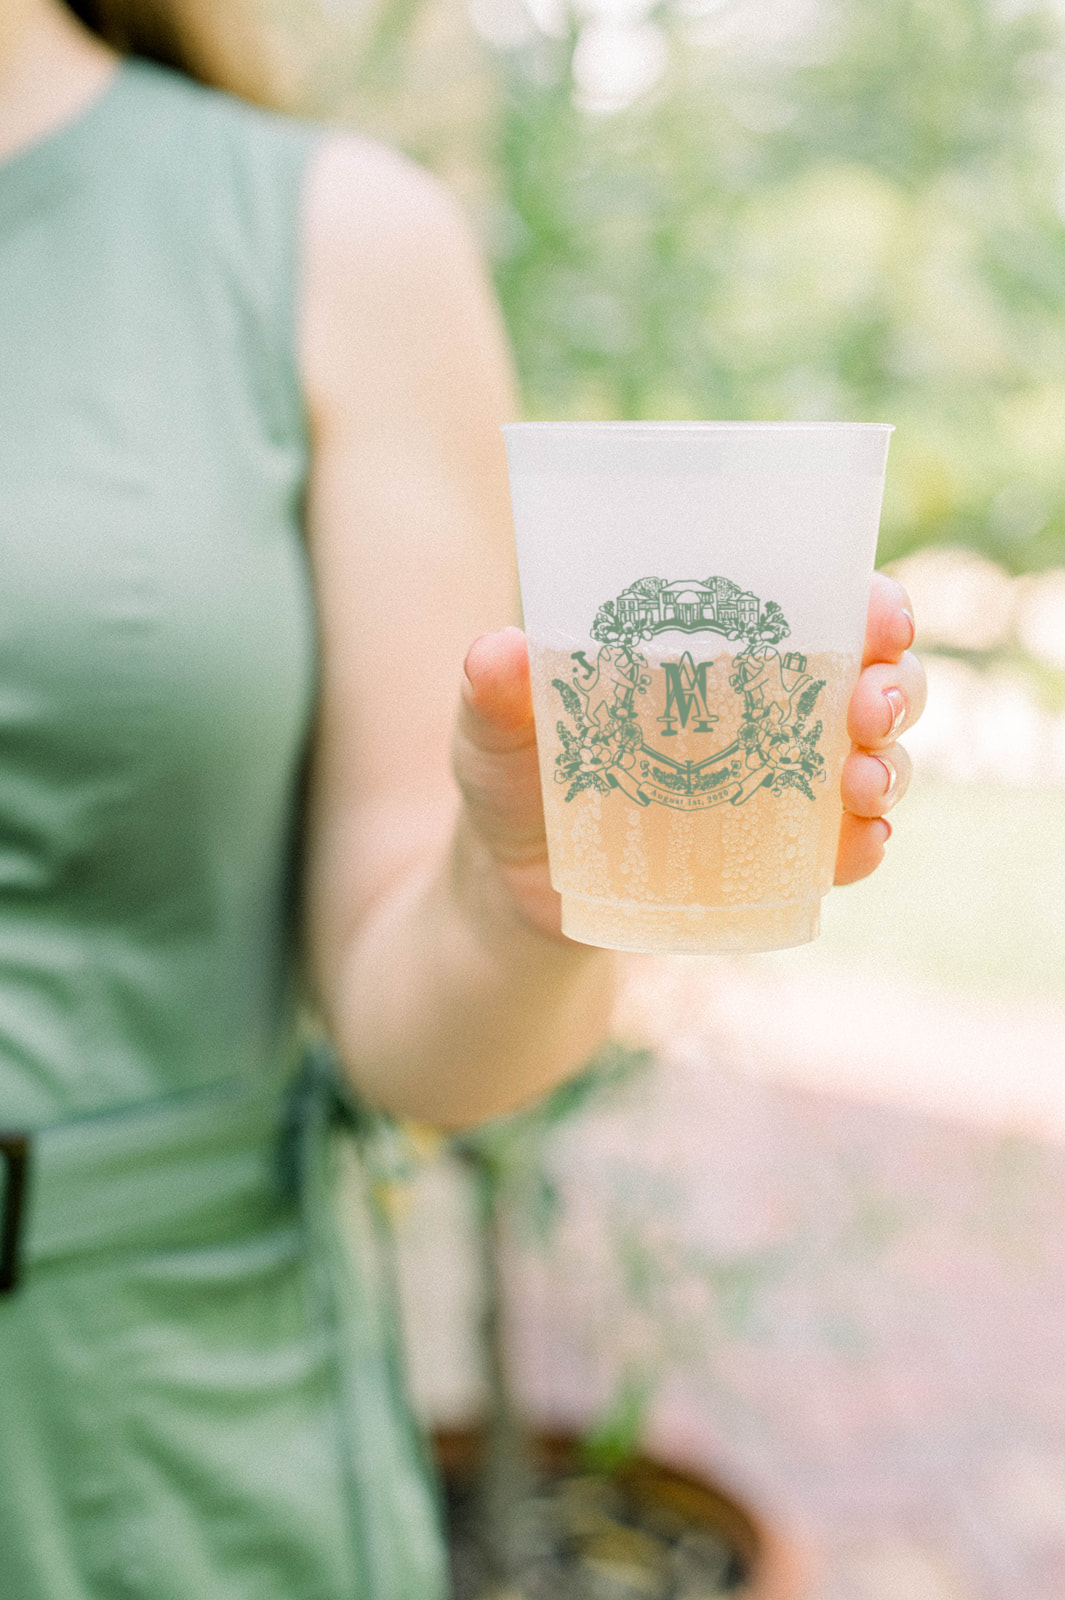 Wedding logo cups by The Welcoming District.